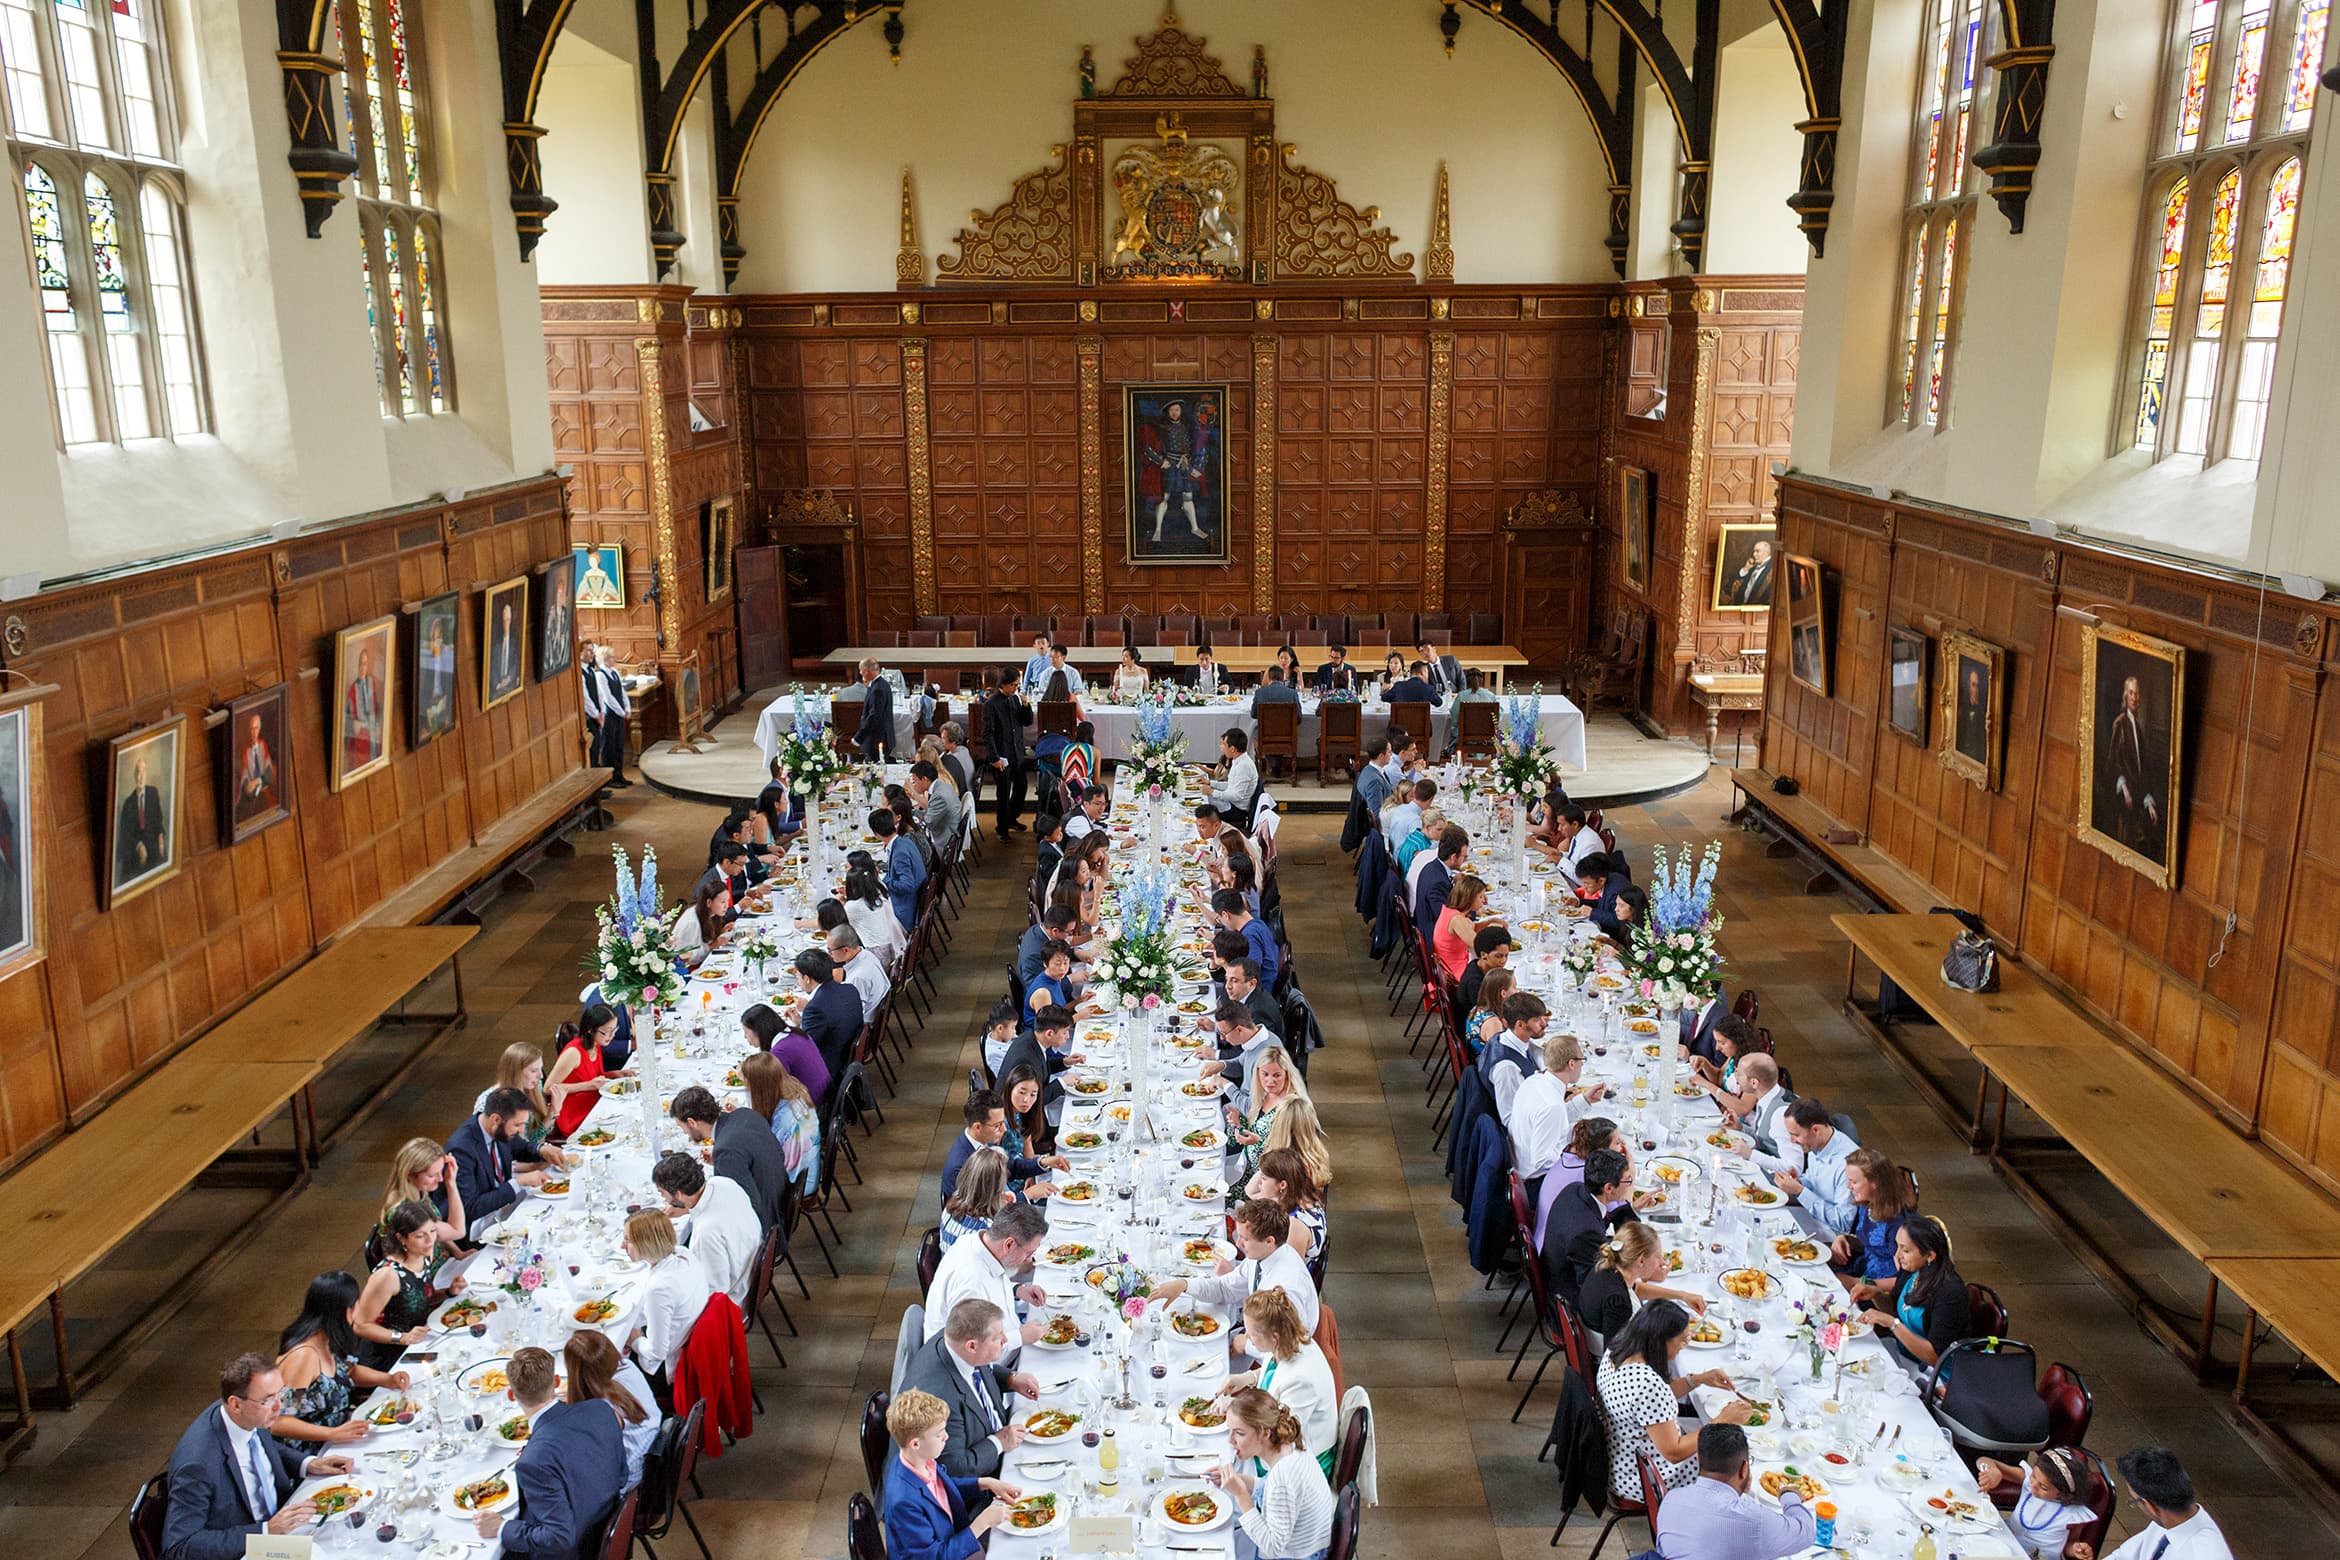 Trinity college dining hall laid out for a wedding